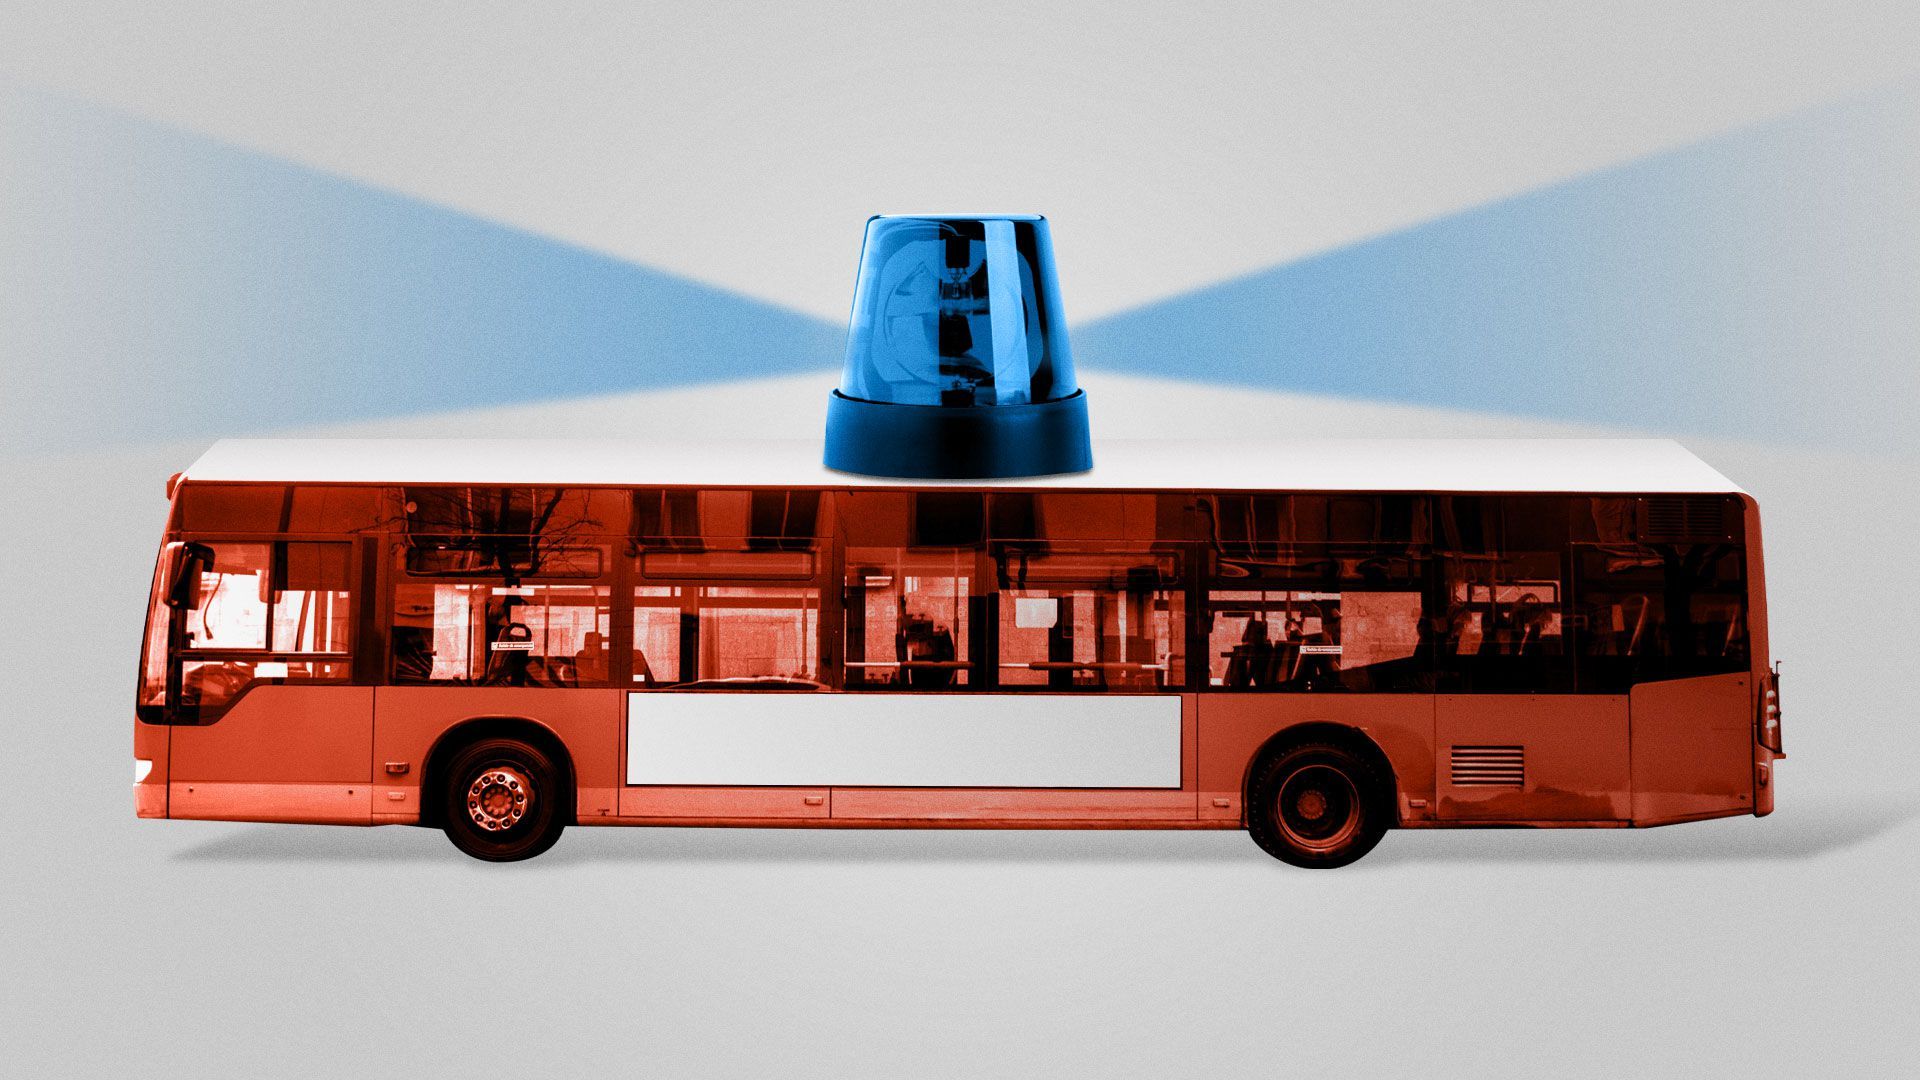 Illustration of city bus with police siren light